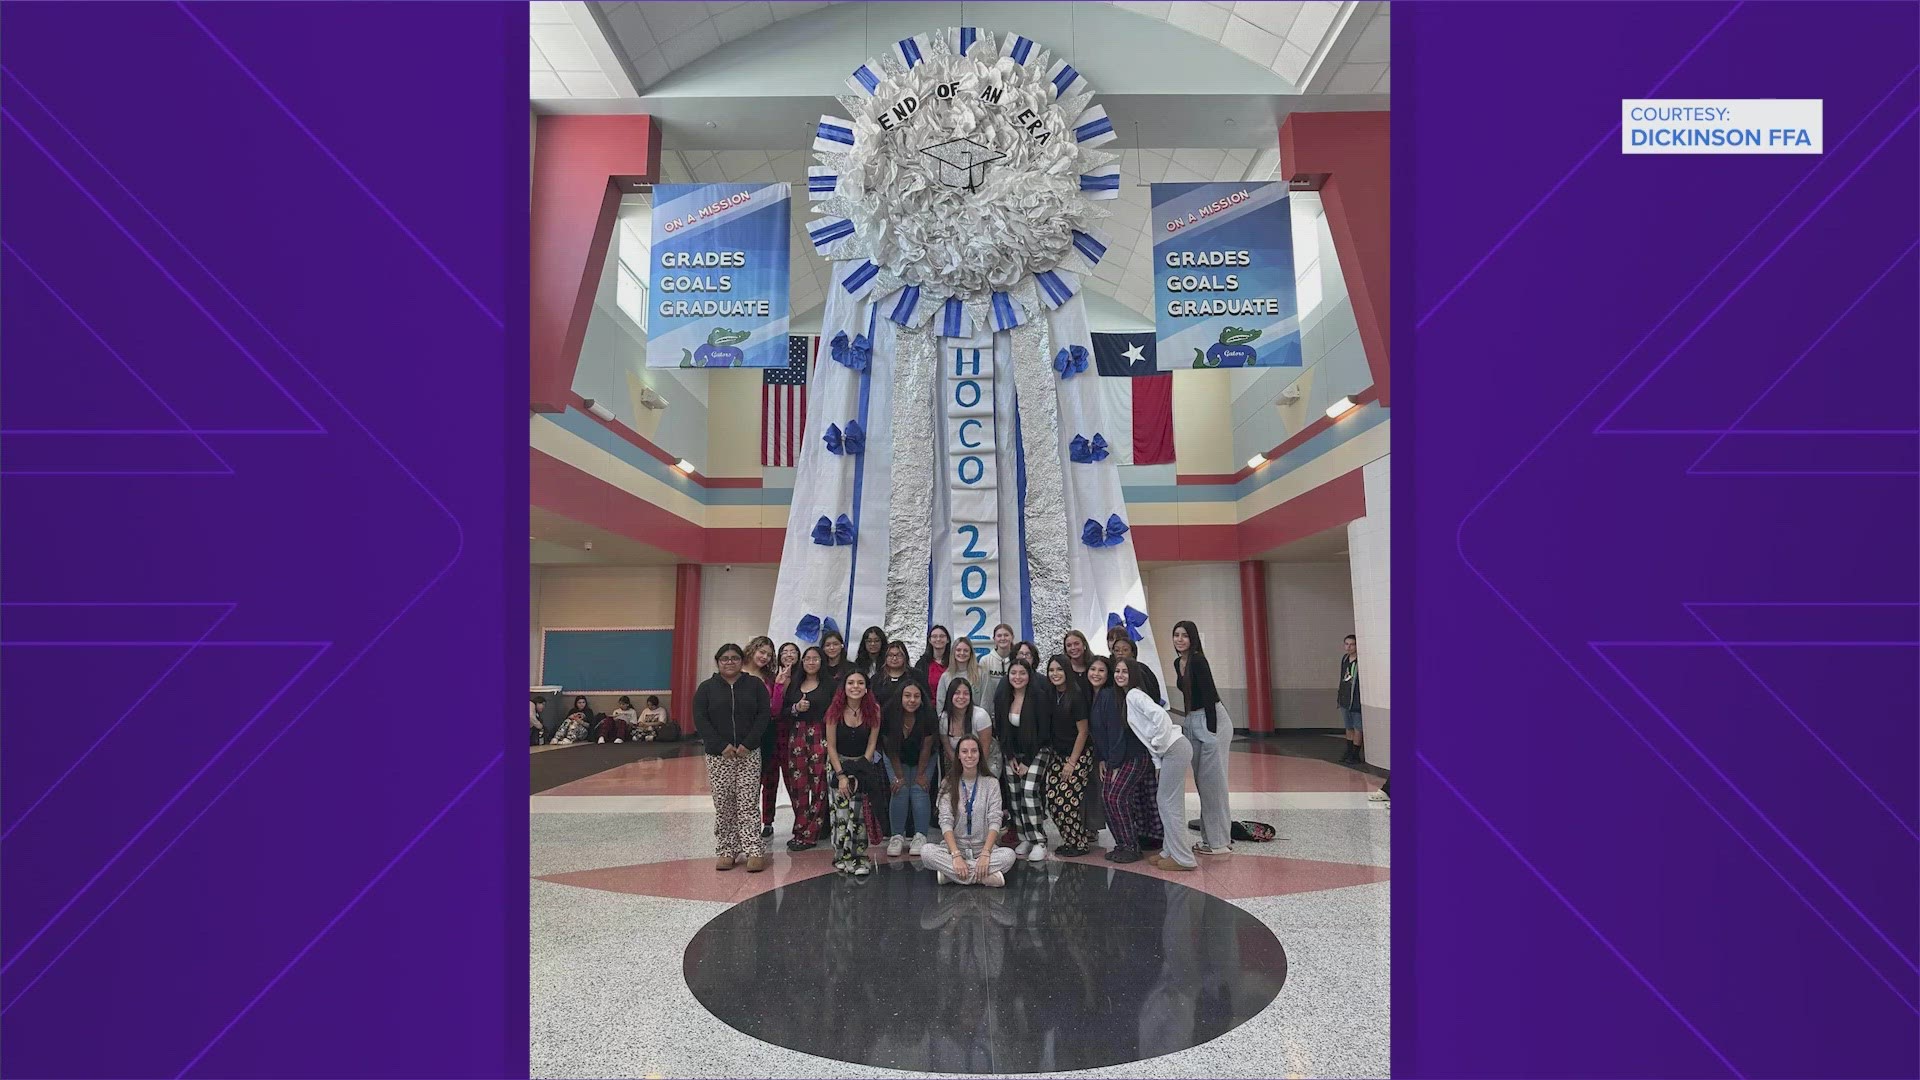 Homecoming is this weekend for Dickinson High School, and the students and staff are going all out, including this 28-foot tall mum!